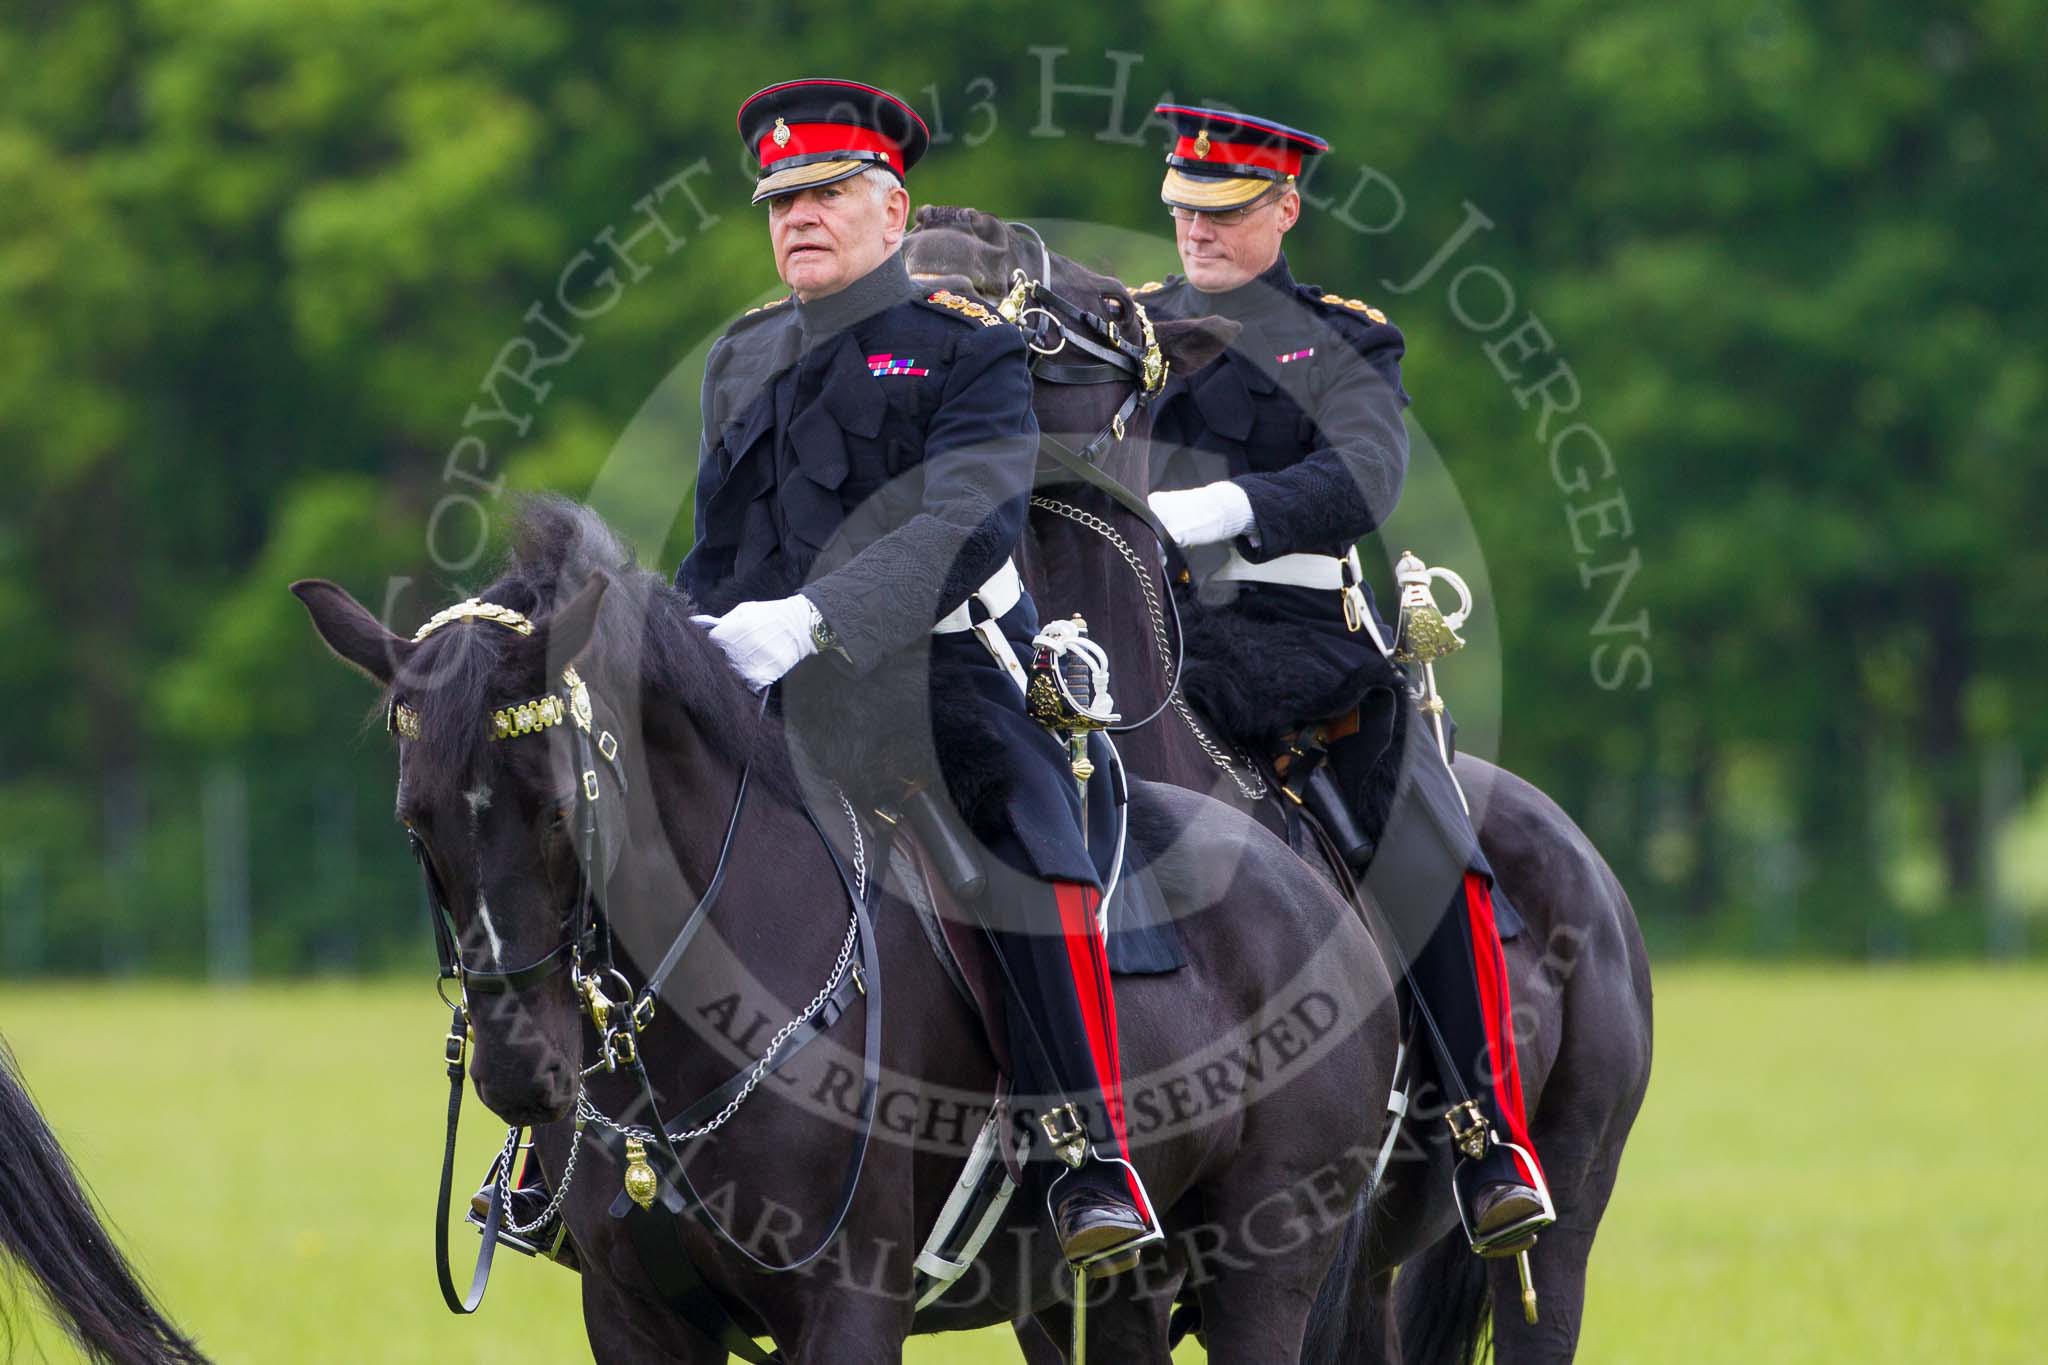 The Light Cavalry HAC Annual Review and Inspection 2013.
Windsor Great Park Review Ground,
Windsor,
Berkshire,
United Kingdom,
on 09 June 2013 at 13:27, image #368